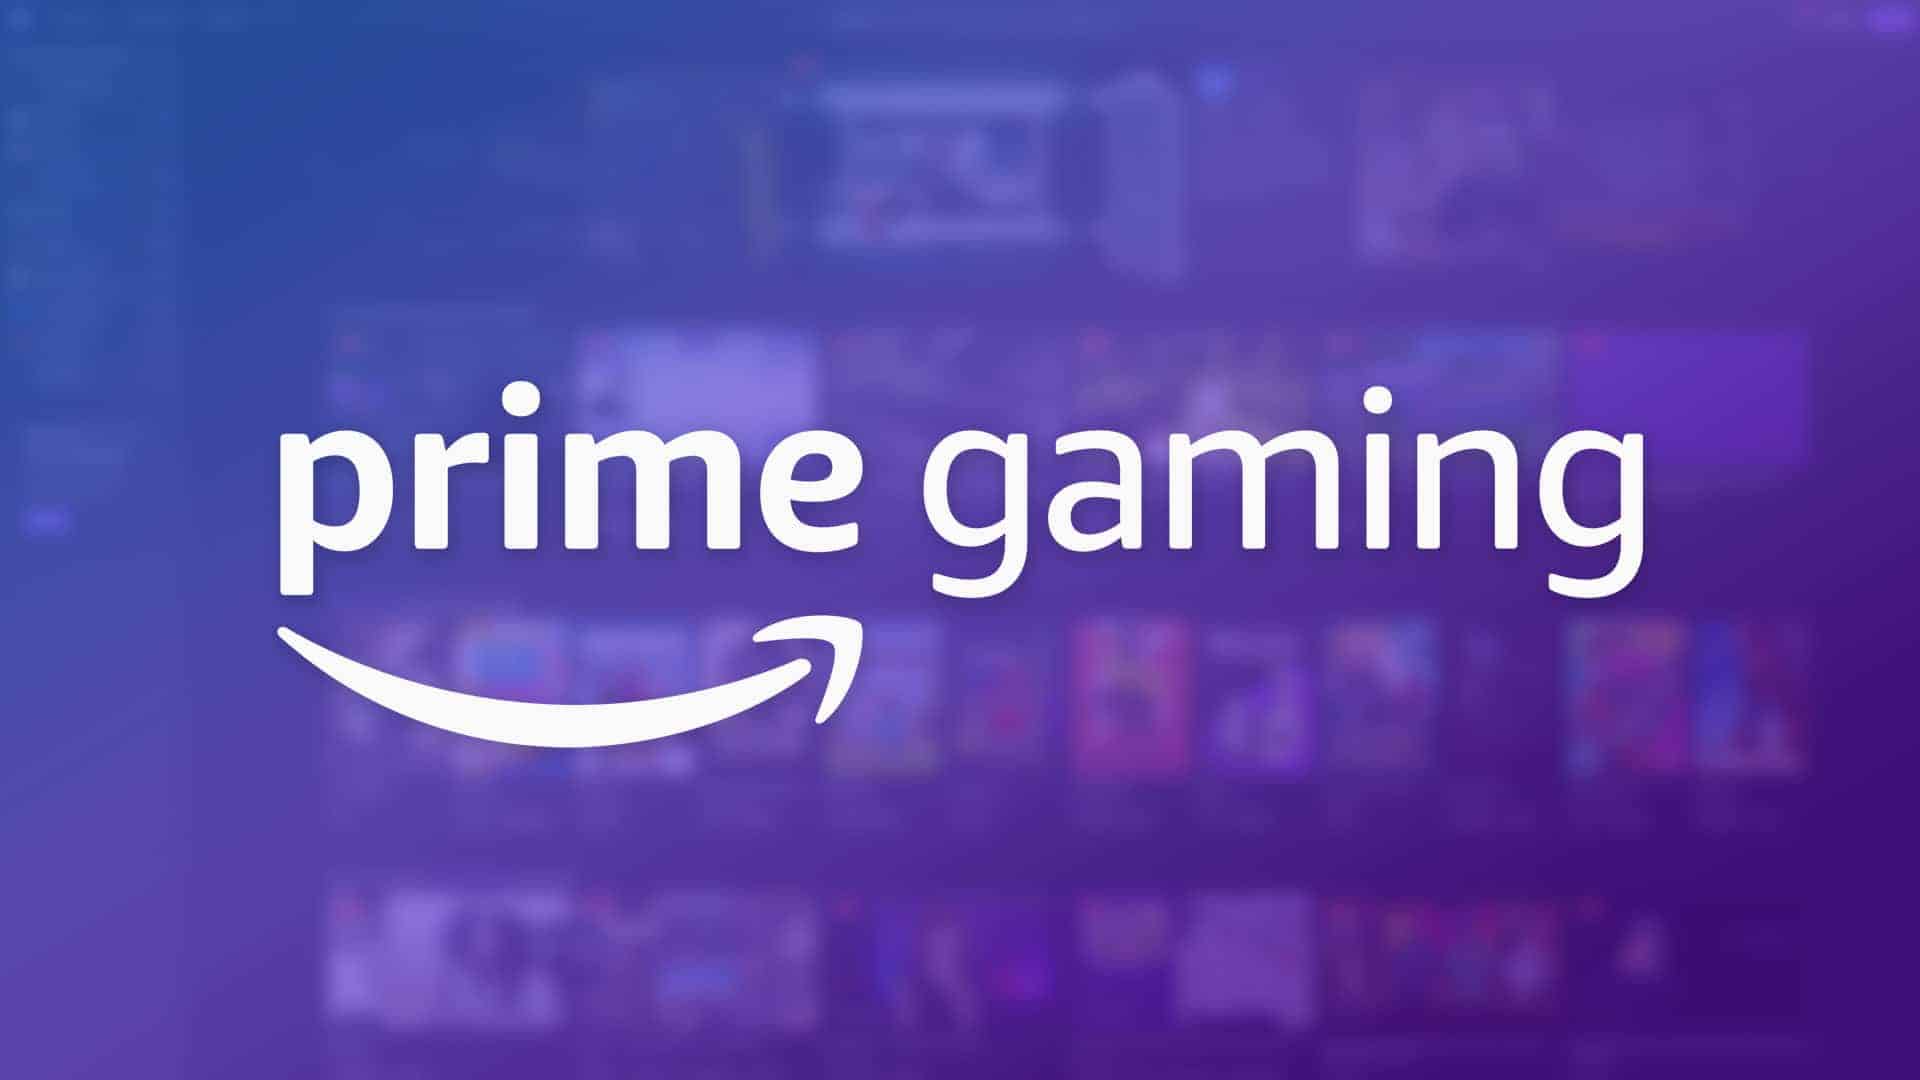 Prime Gaming giving away free games again, including